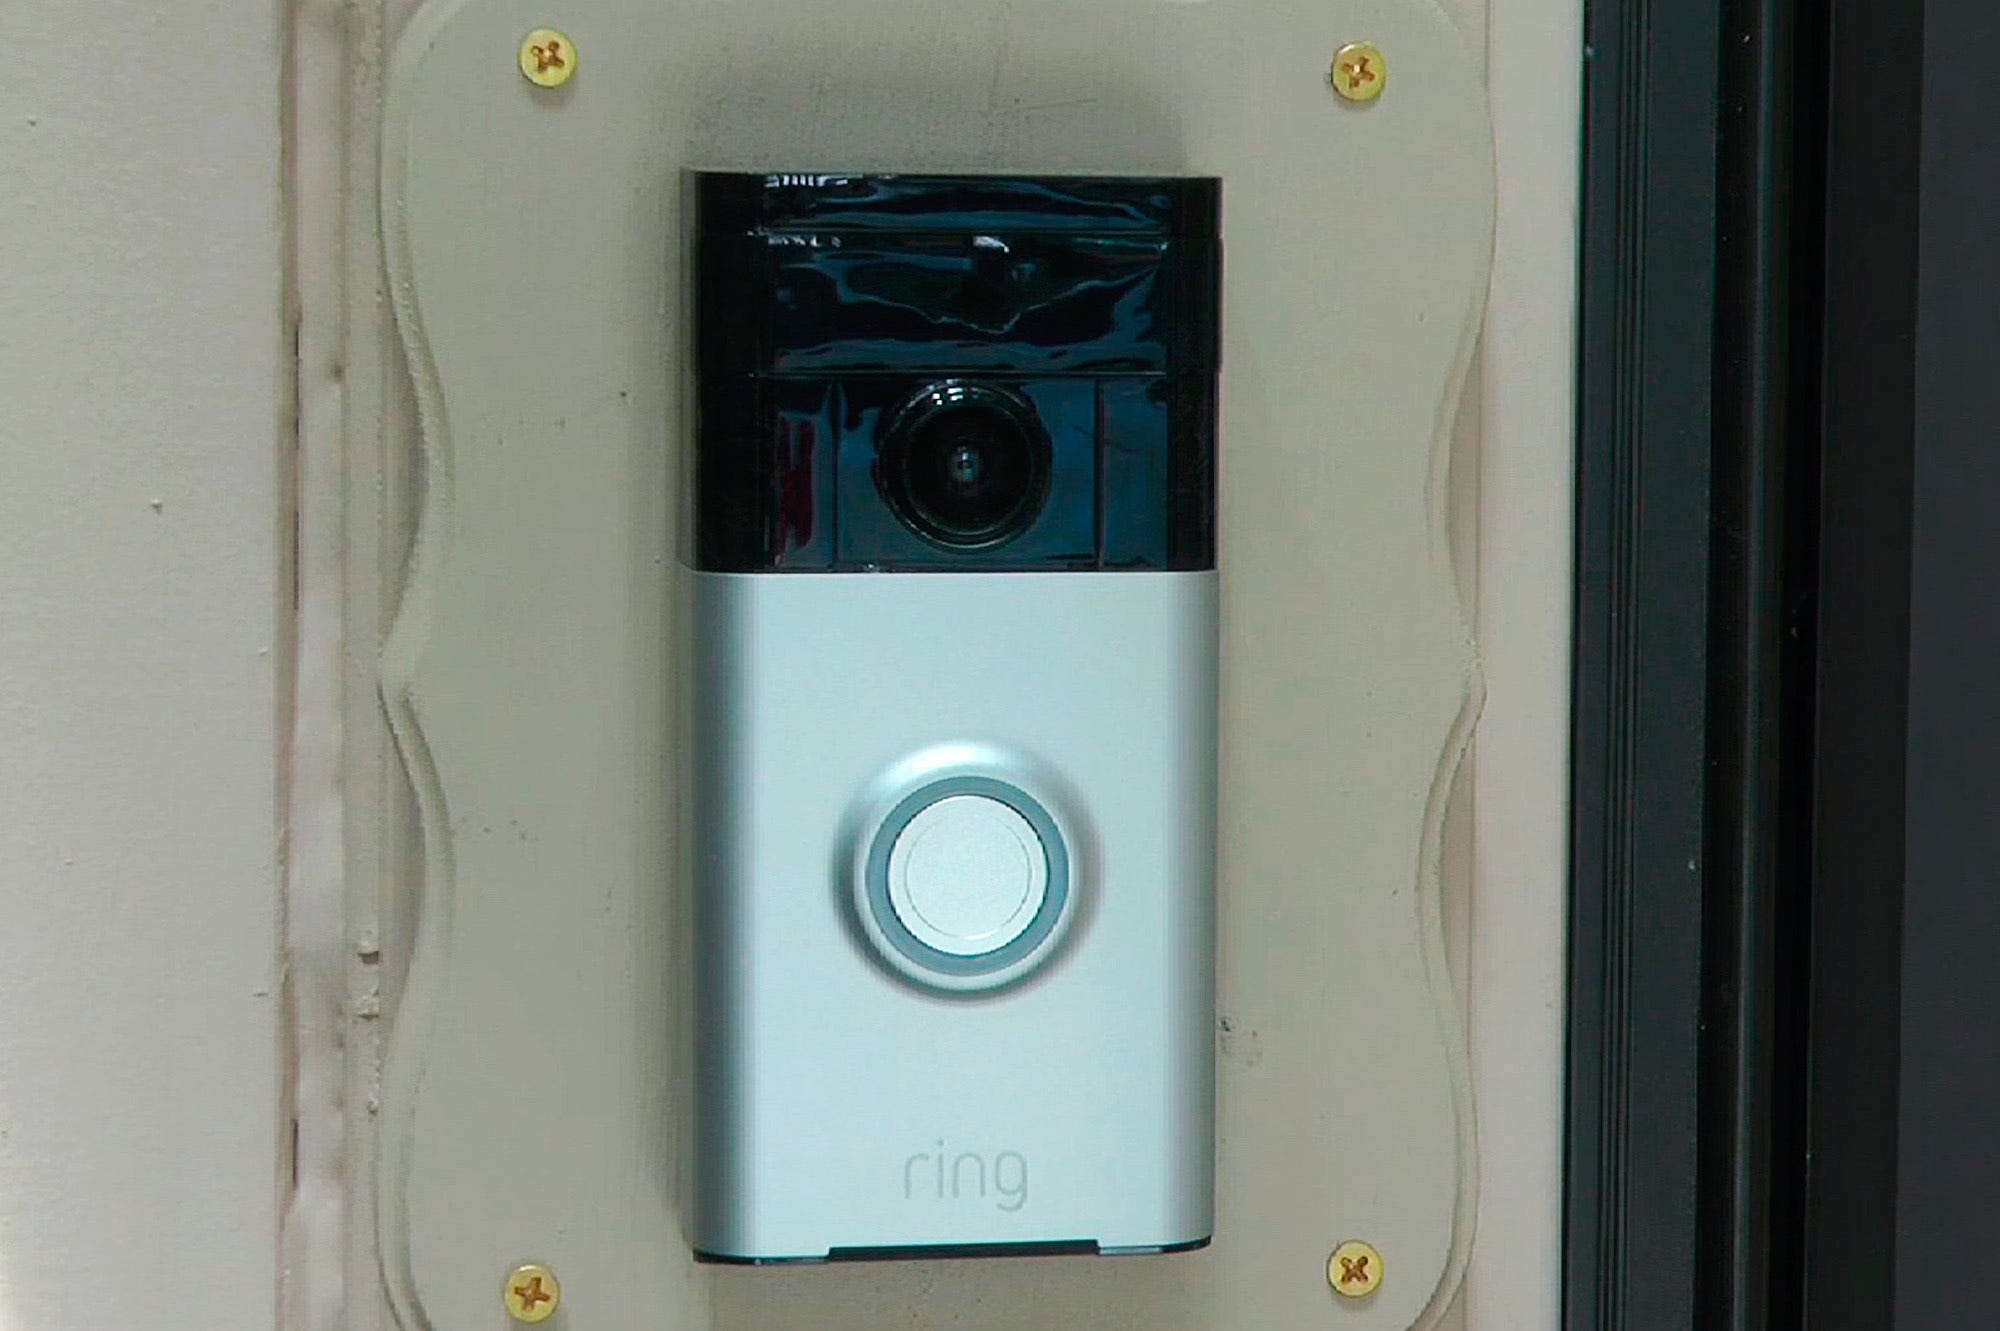 Amazon-owned Ring doorbell cameras attract congressional concern